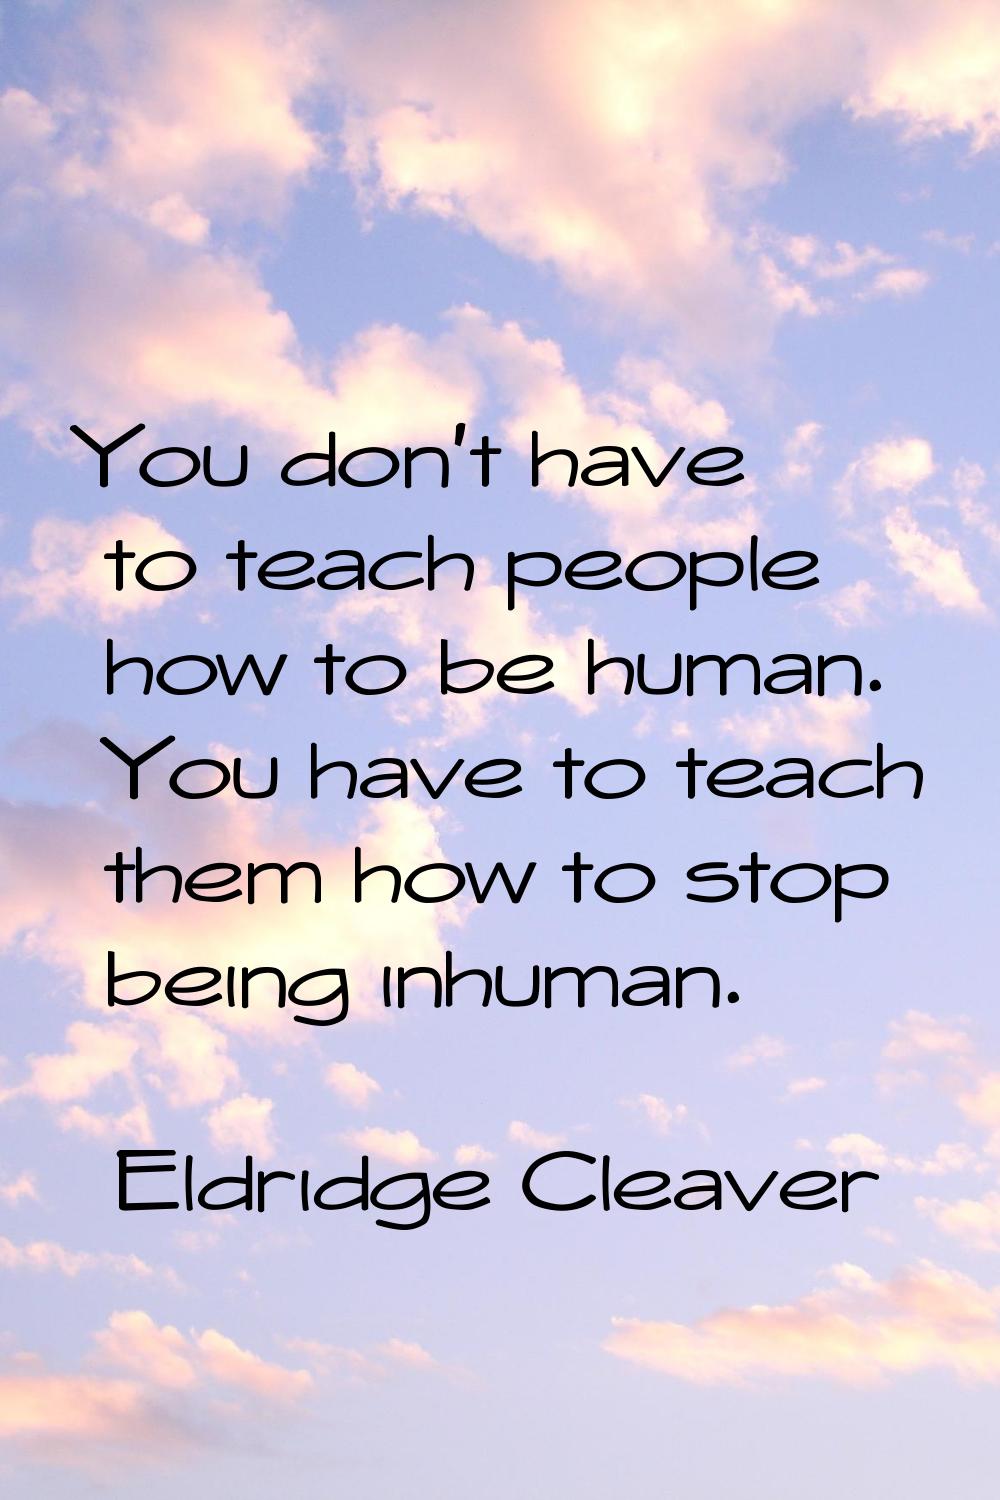 You don't have to teach people how to be human. You have to teach them how to stop being inhuman.